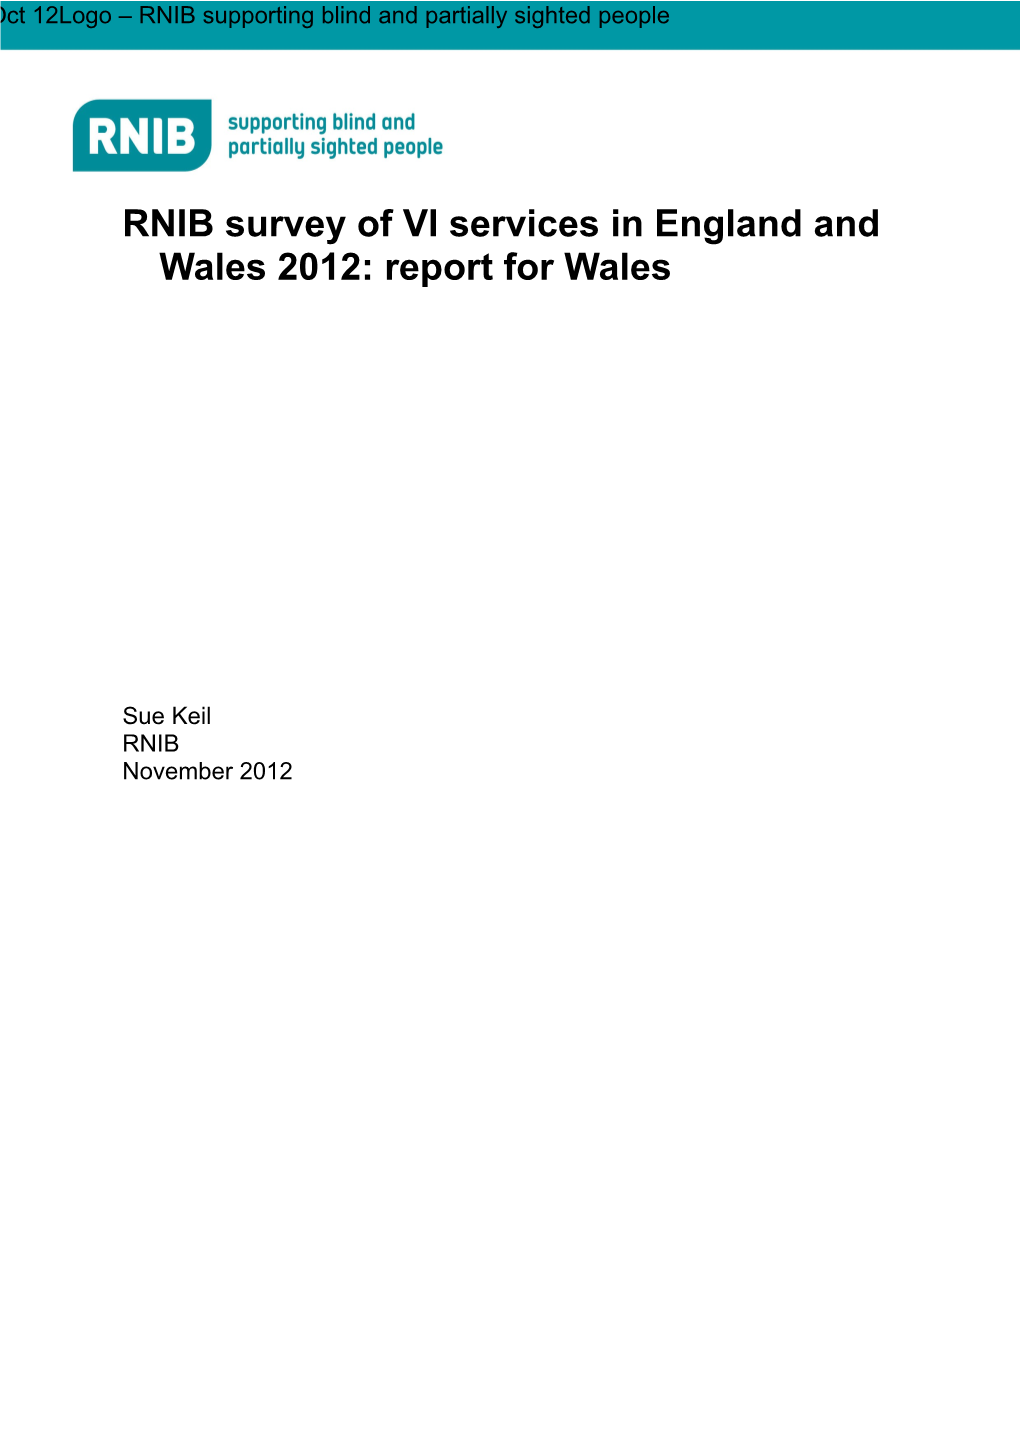 RNIB Survey of VI Services in England and Wales 2012: Report for Wales